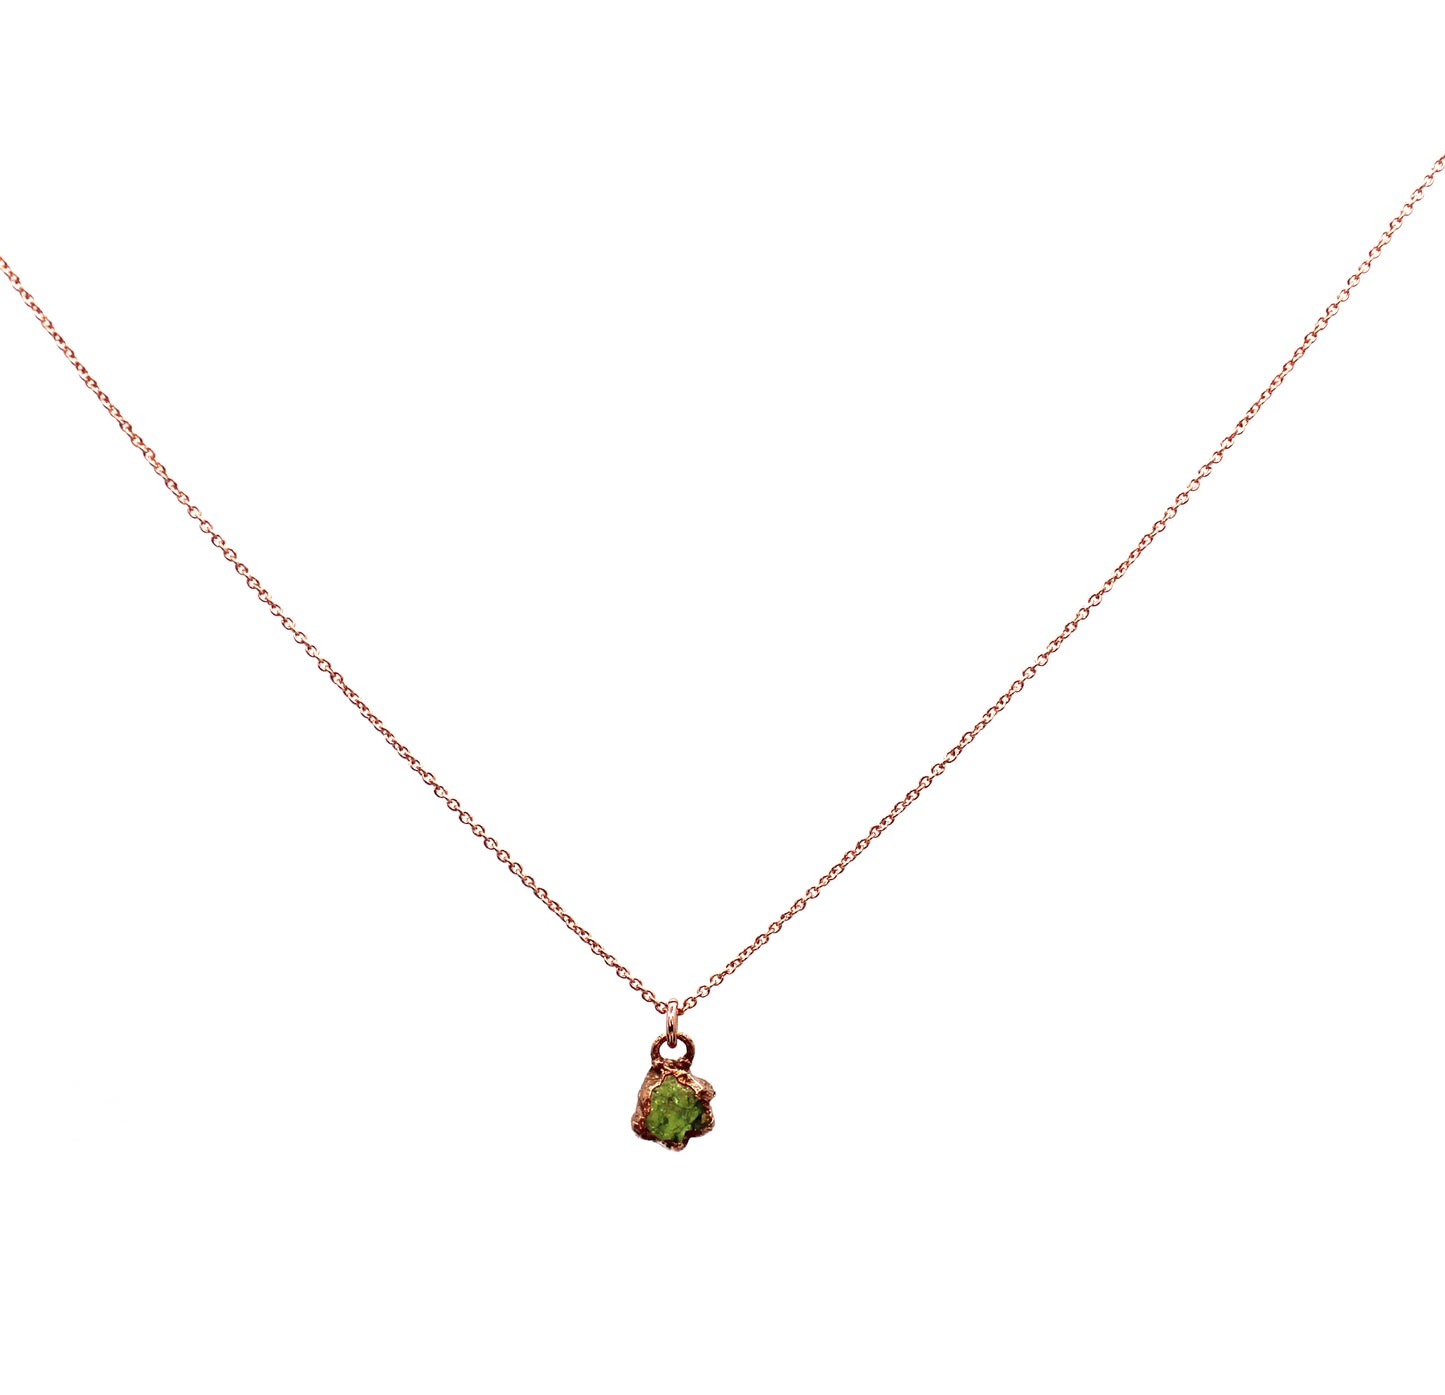 Small Peridot Necklace (August Birthstone)